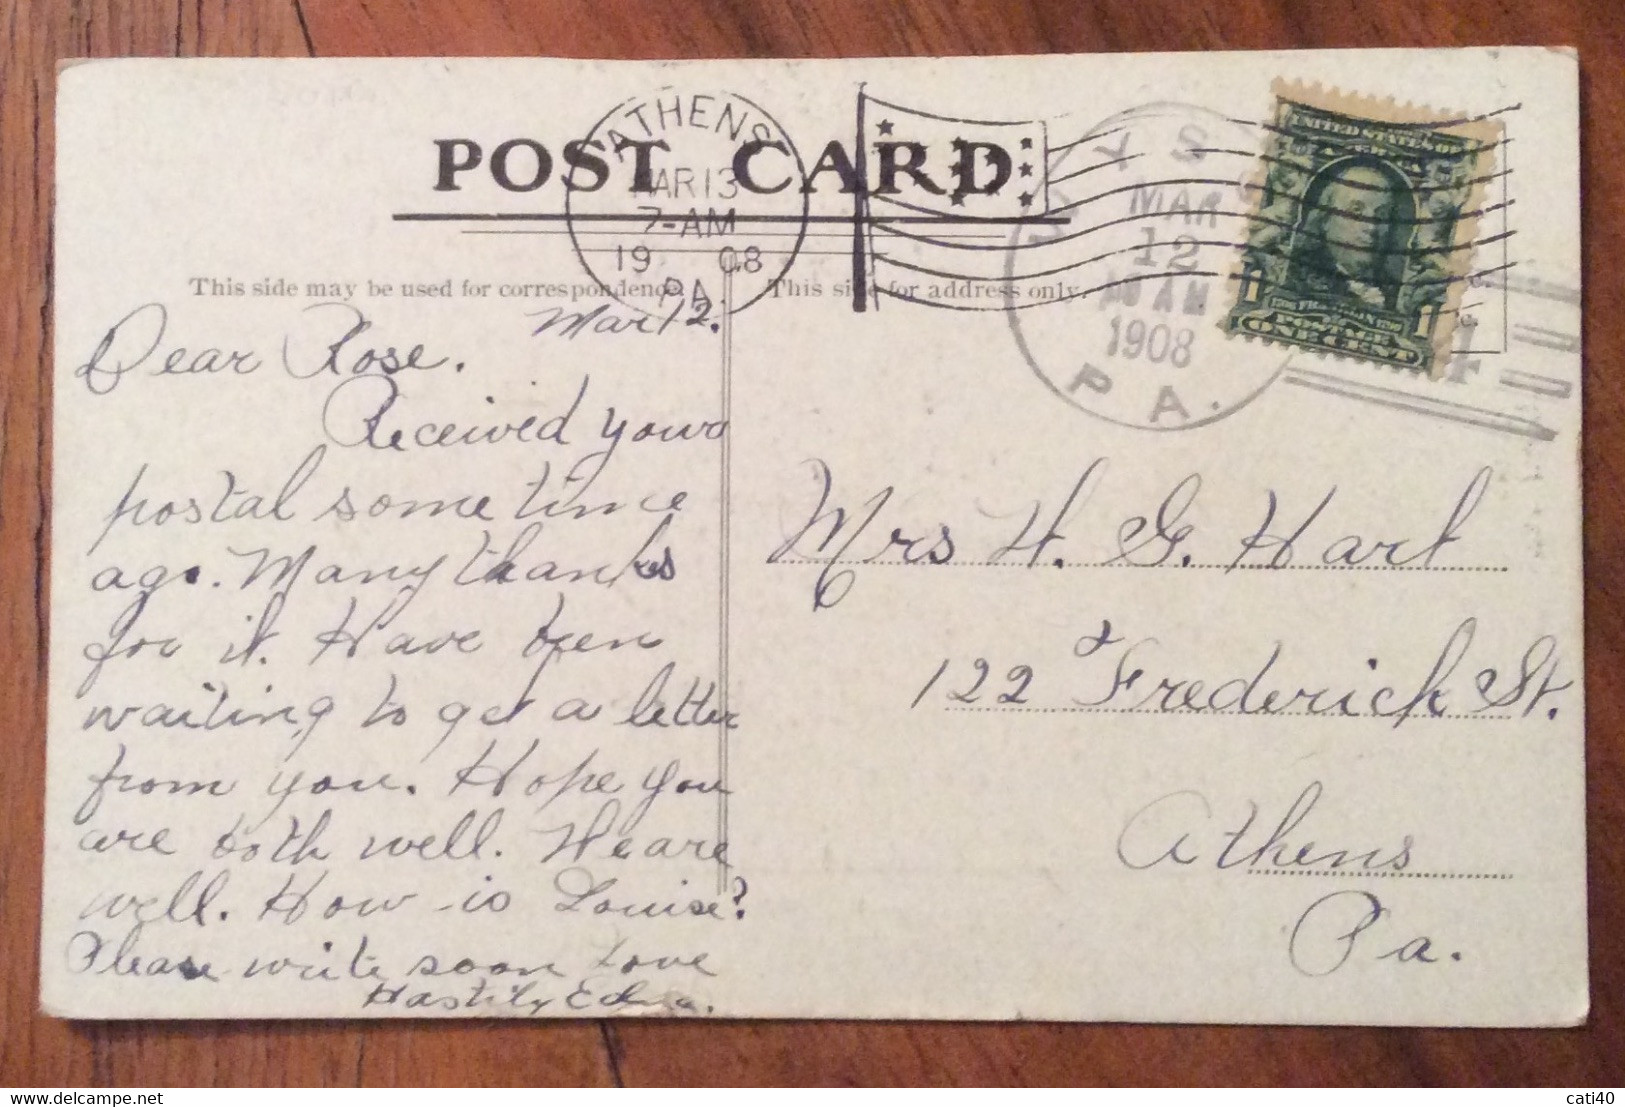 USA - GREETINGS FROM STANDING STONE  - VINTAGE POST CARD TO ATHENS  MAR 13  1908 - Fall River